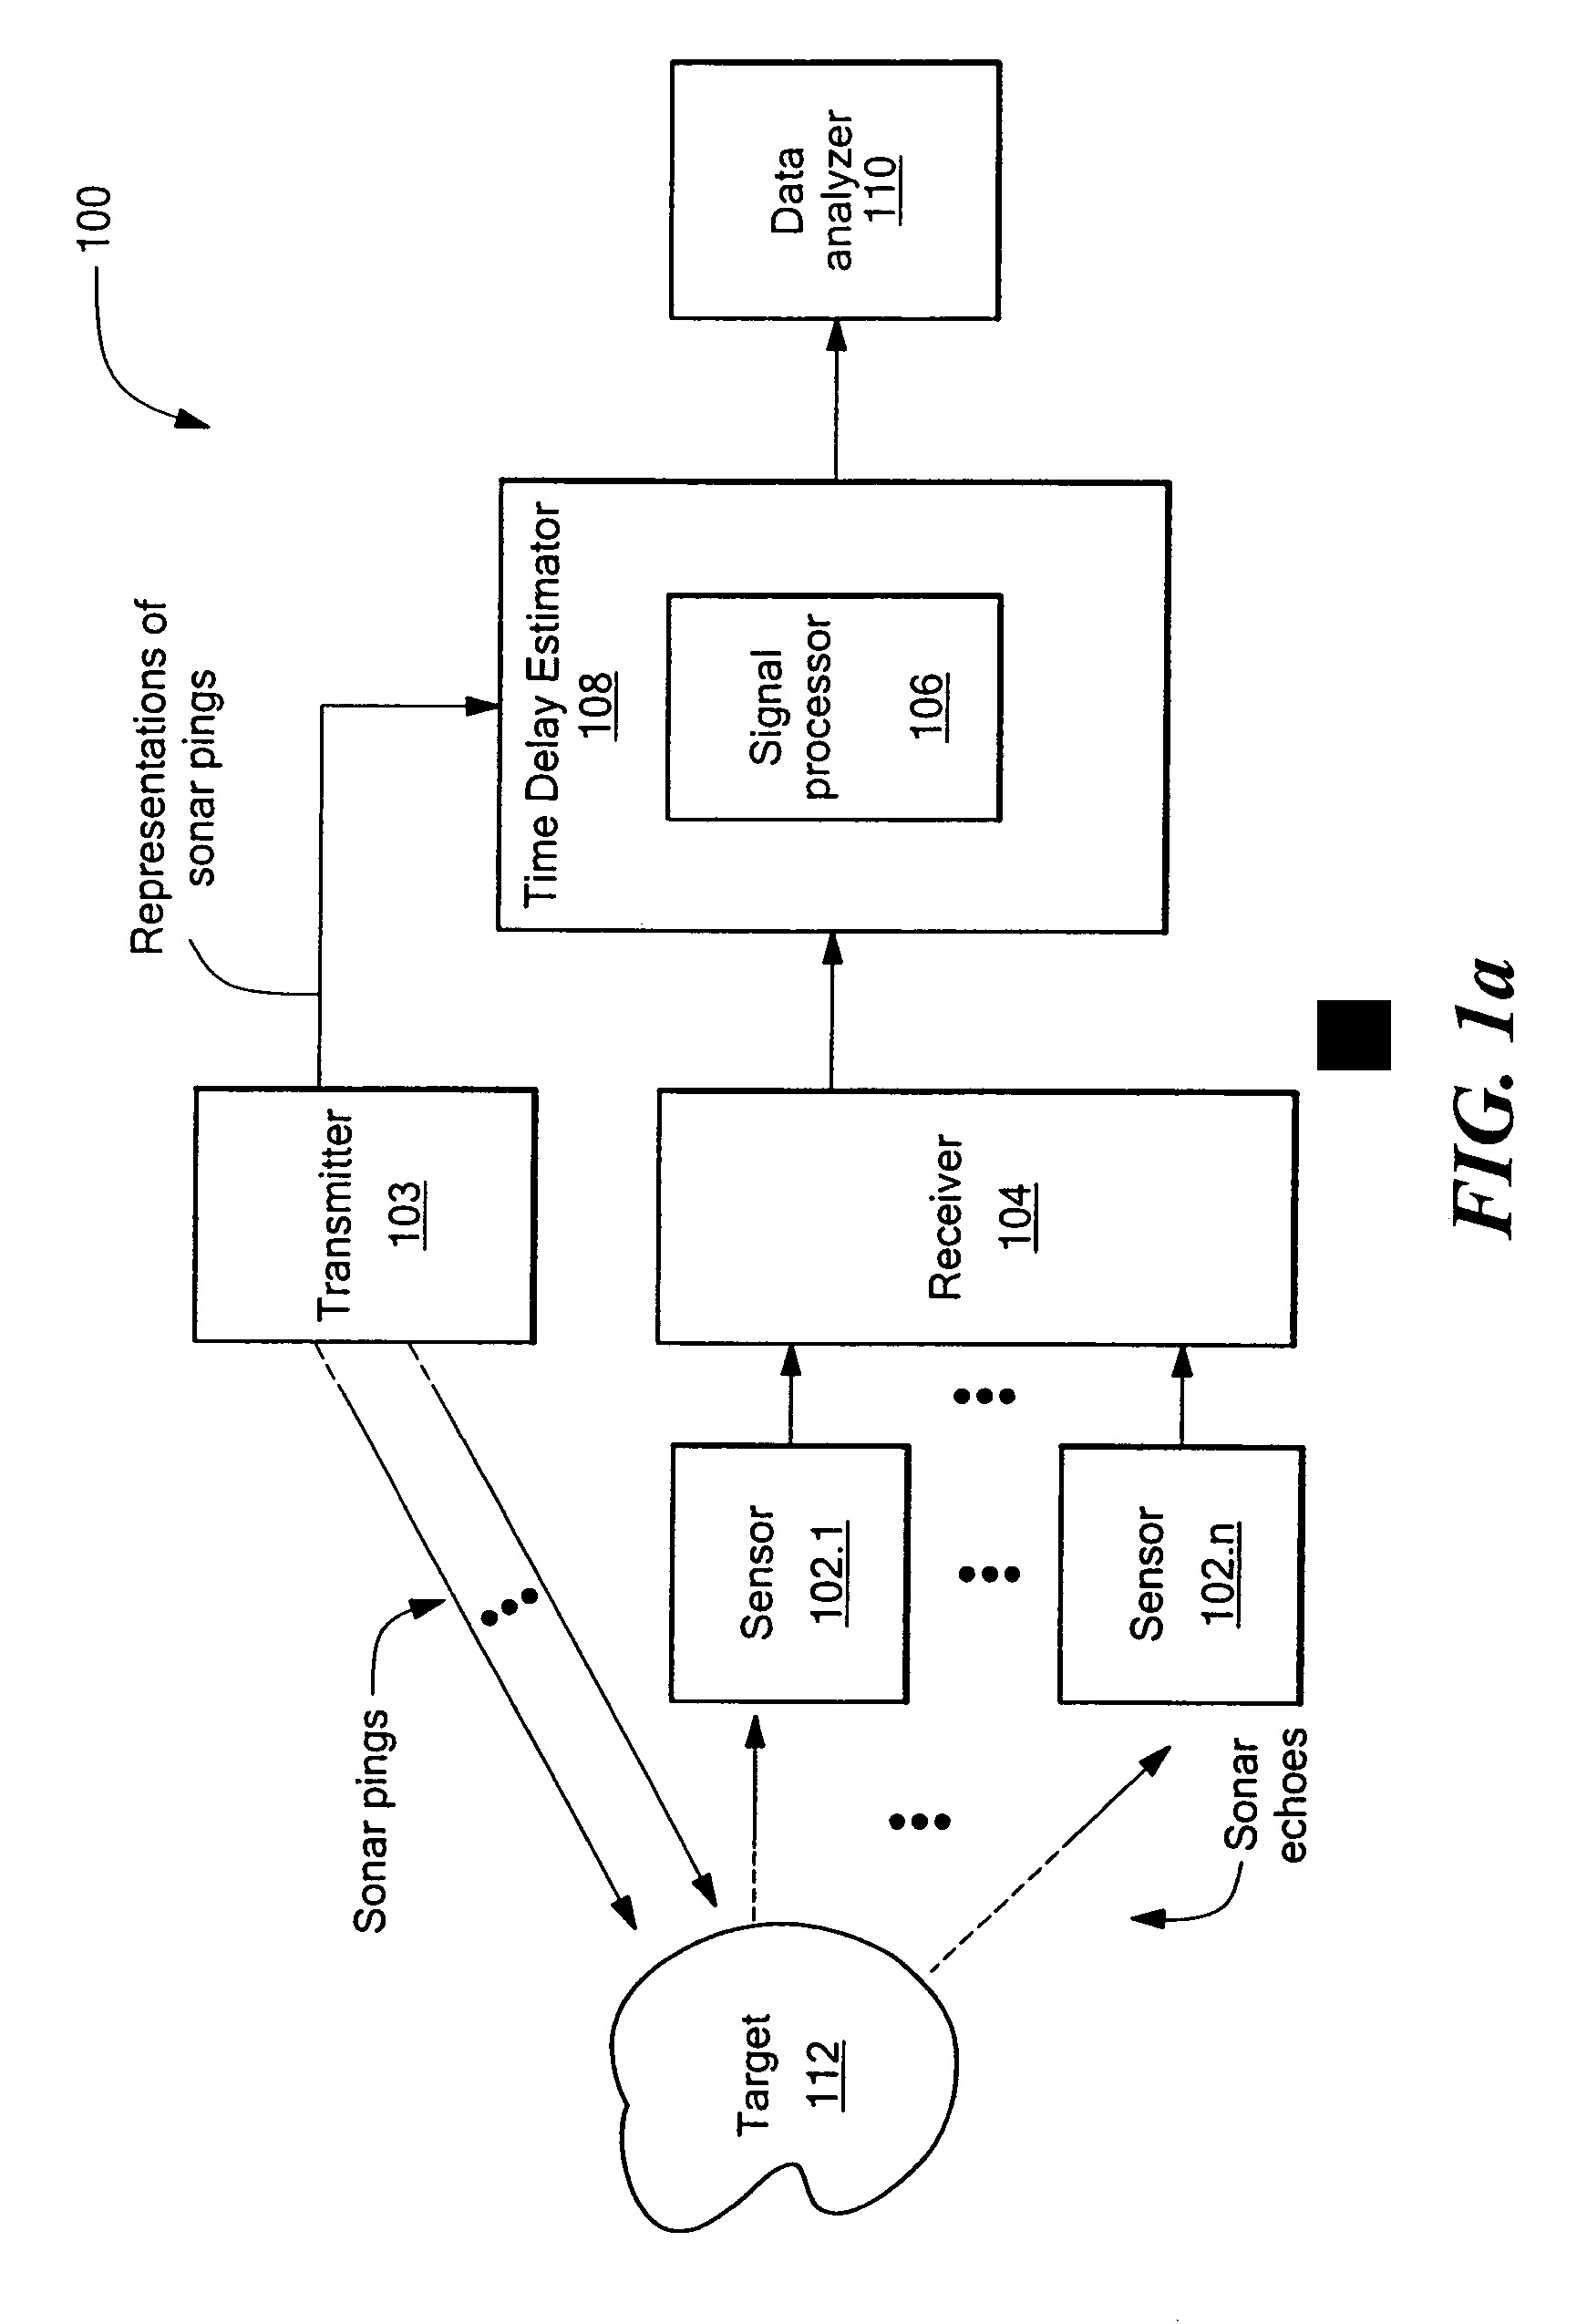 Apparatus and method for performing time delay estimation of signals propagating through an environment